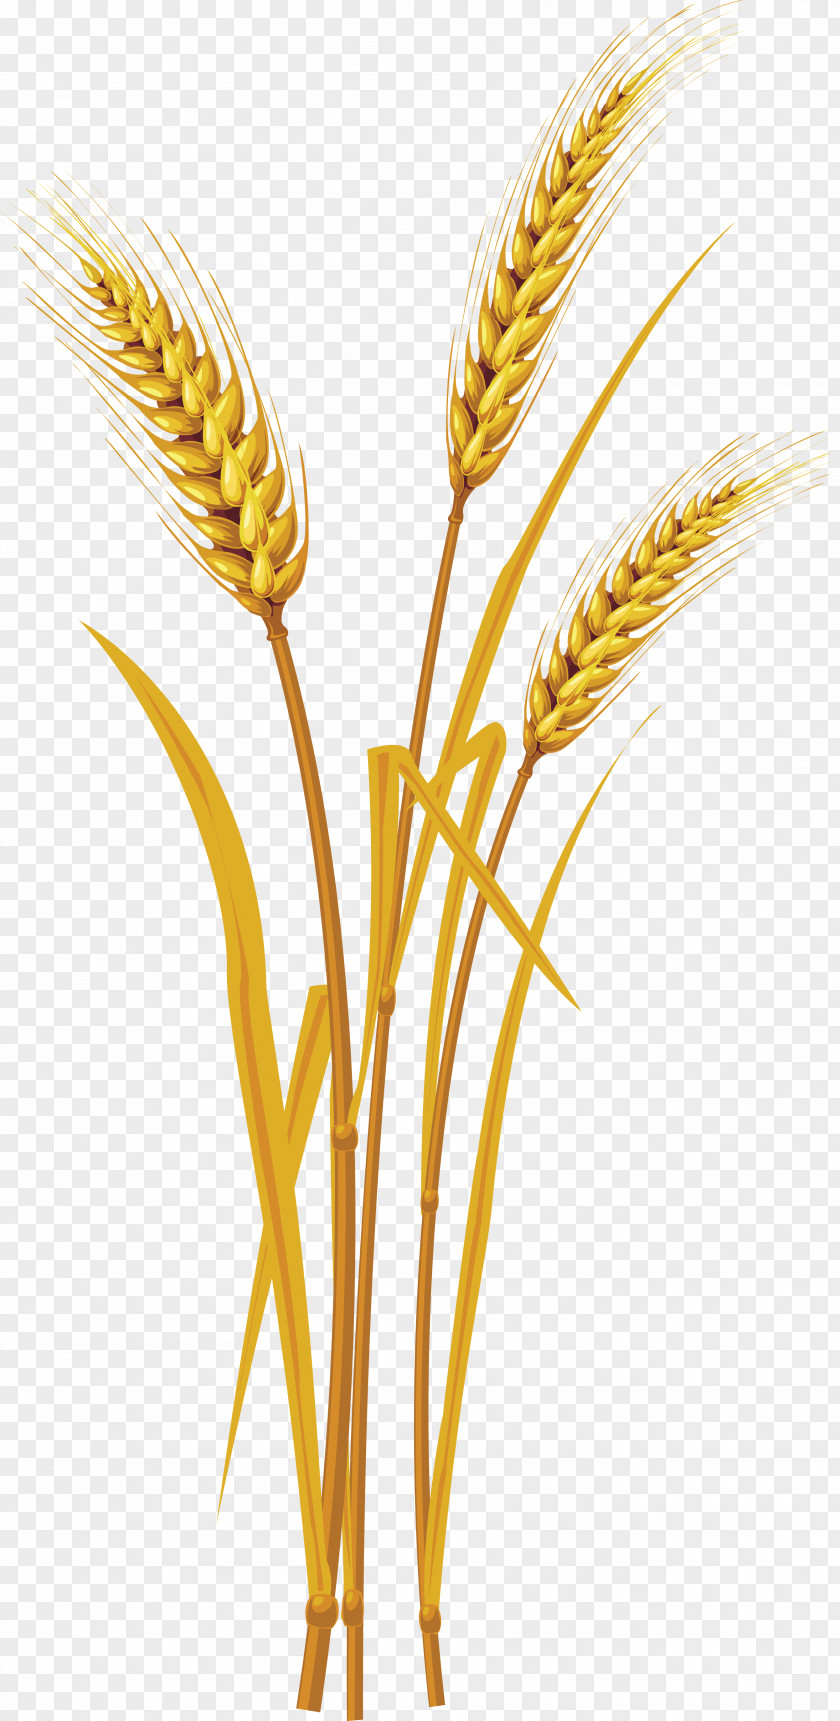 Wheat Oregon Commission Icon Computer File PNG